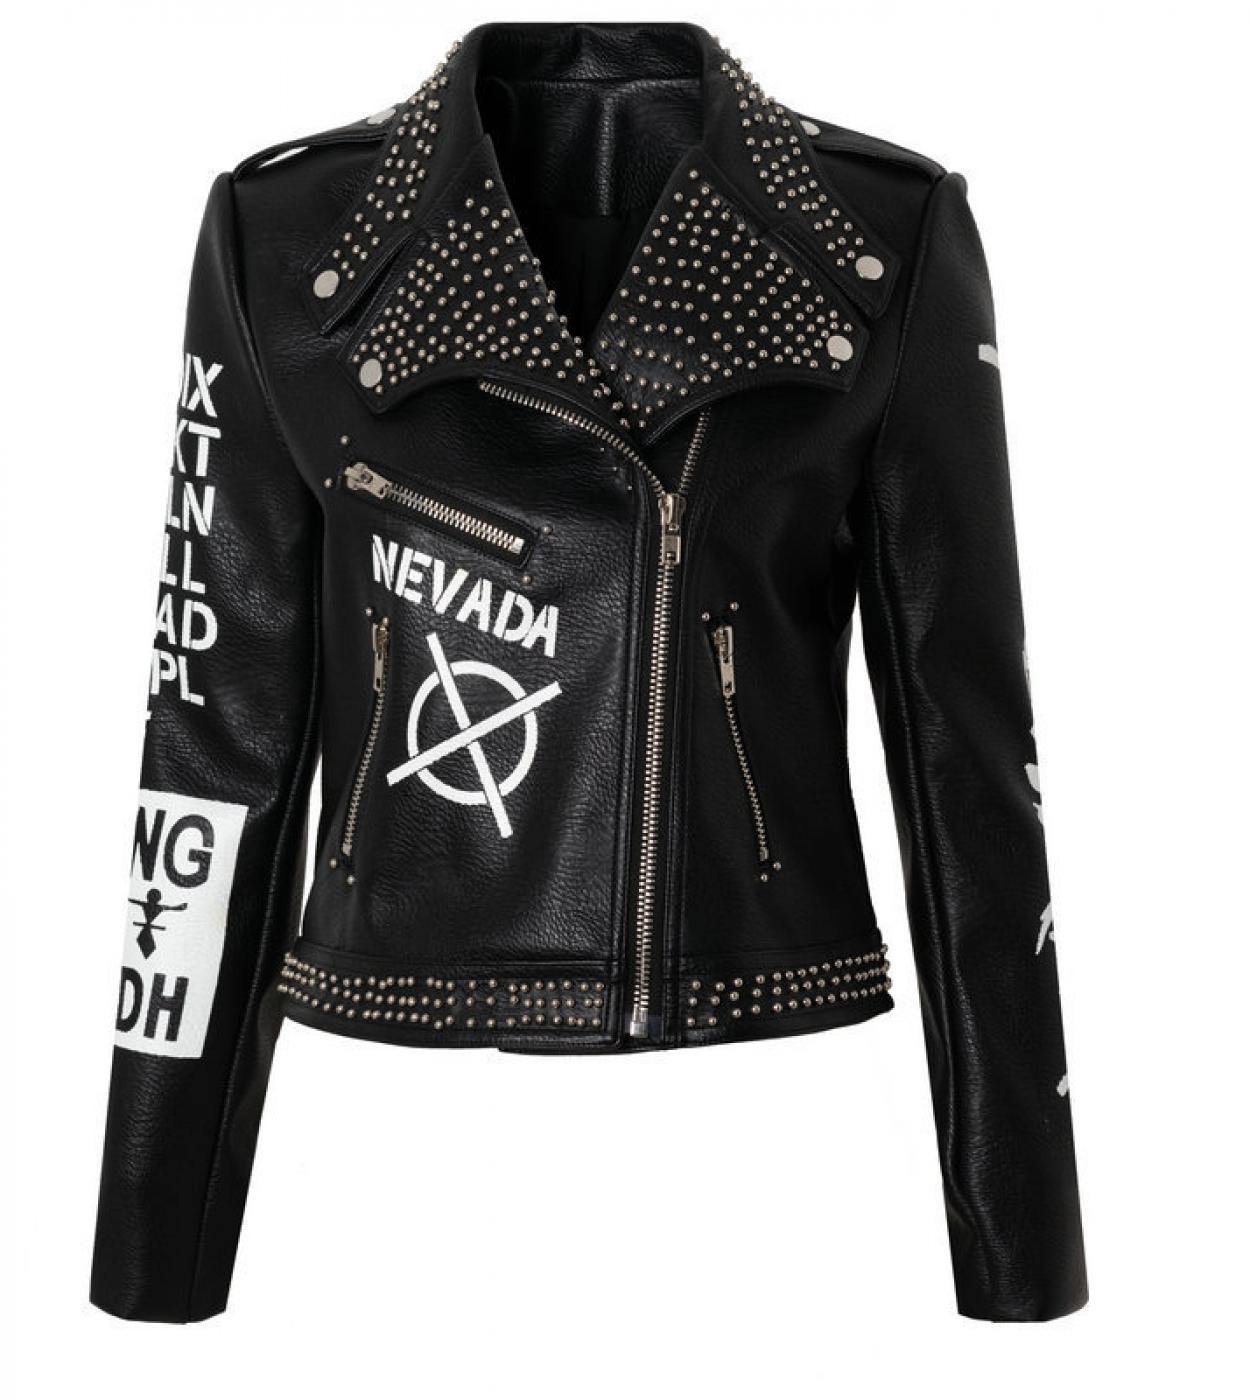 Spring Punk Rock Rivet Leather Jacket Women Letter Black Jacket And Coat Graffiti Motorcycle Colthes Motorcycle Colthes 